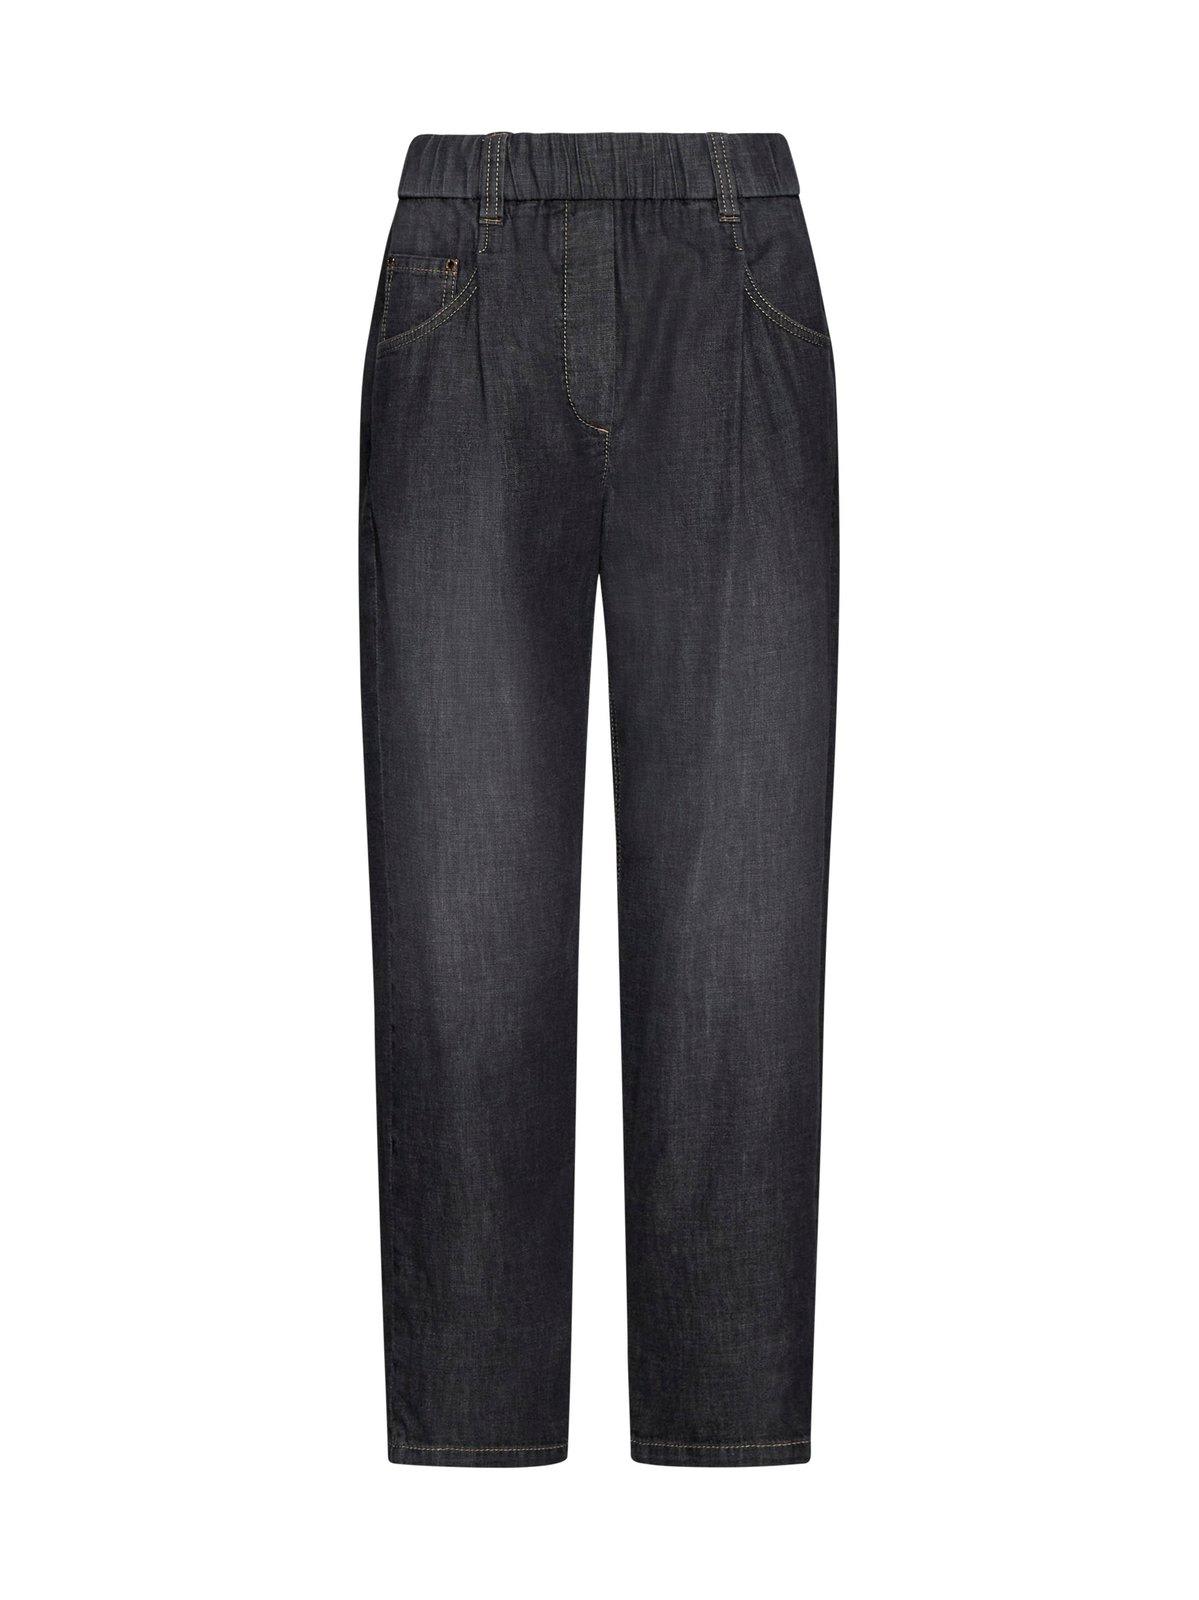 BRUNELLO CUCINELLI ELASTICATED WAISTBAND CROPPED JEANS